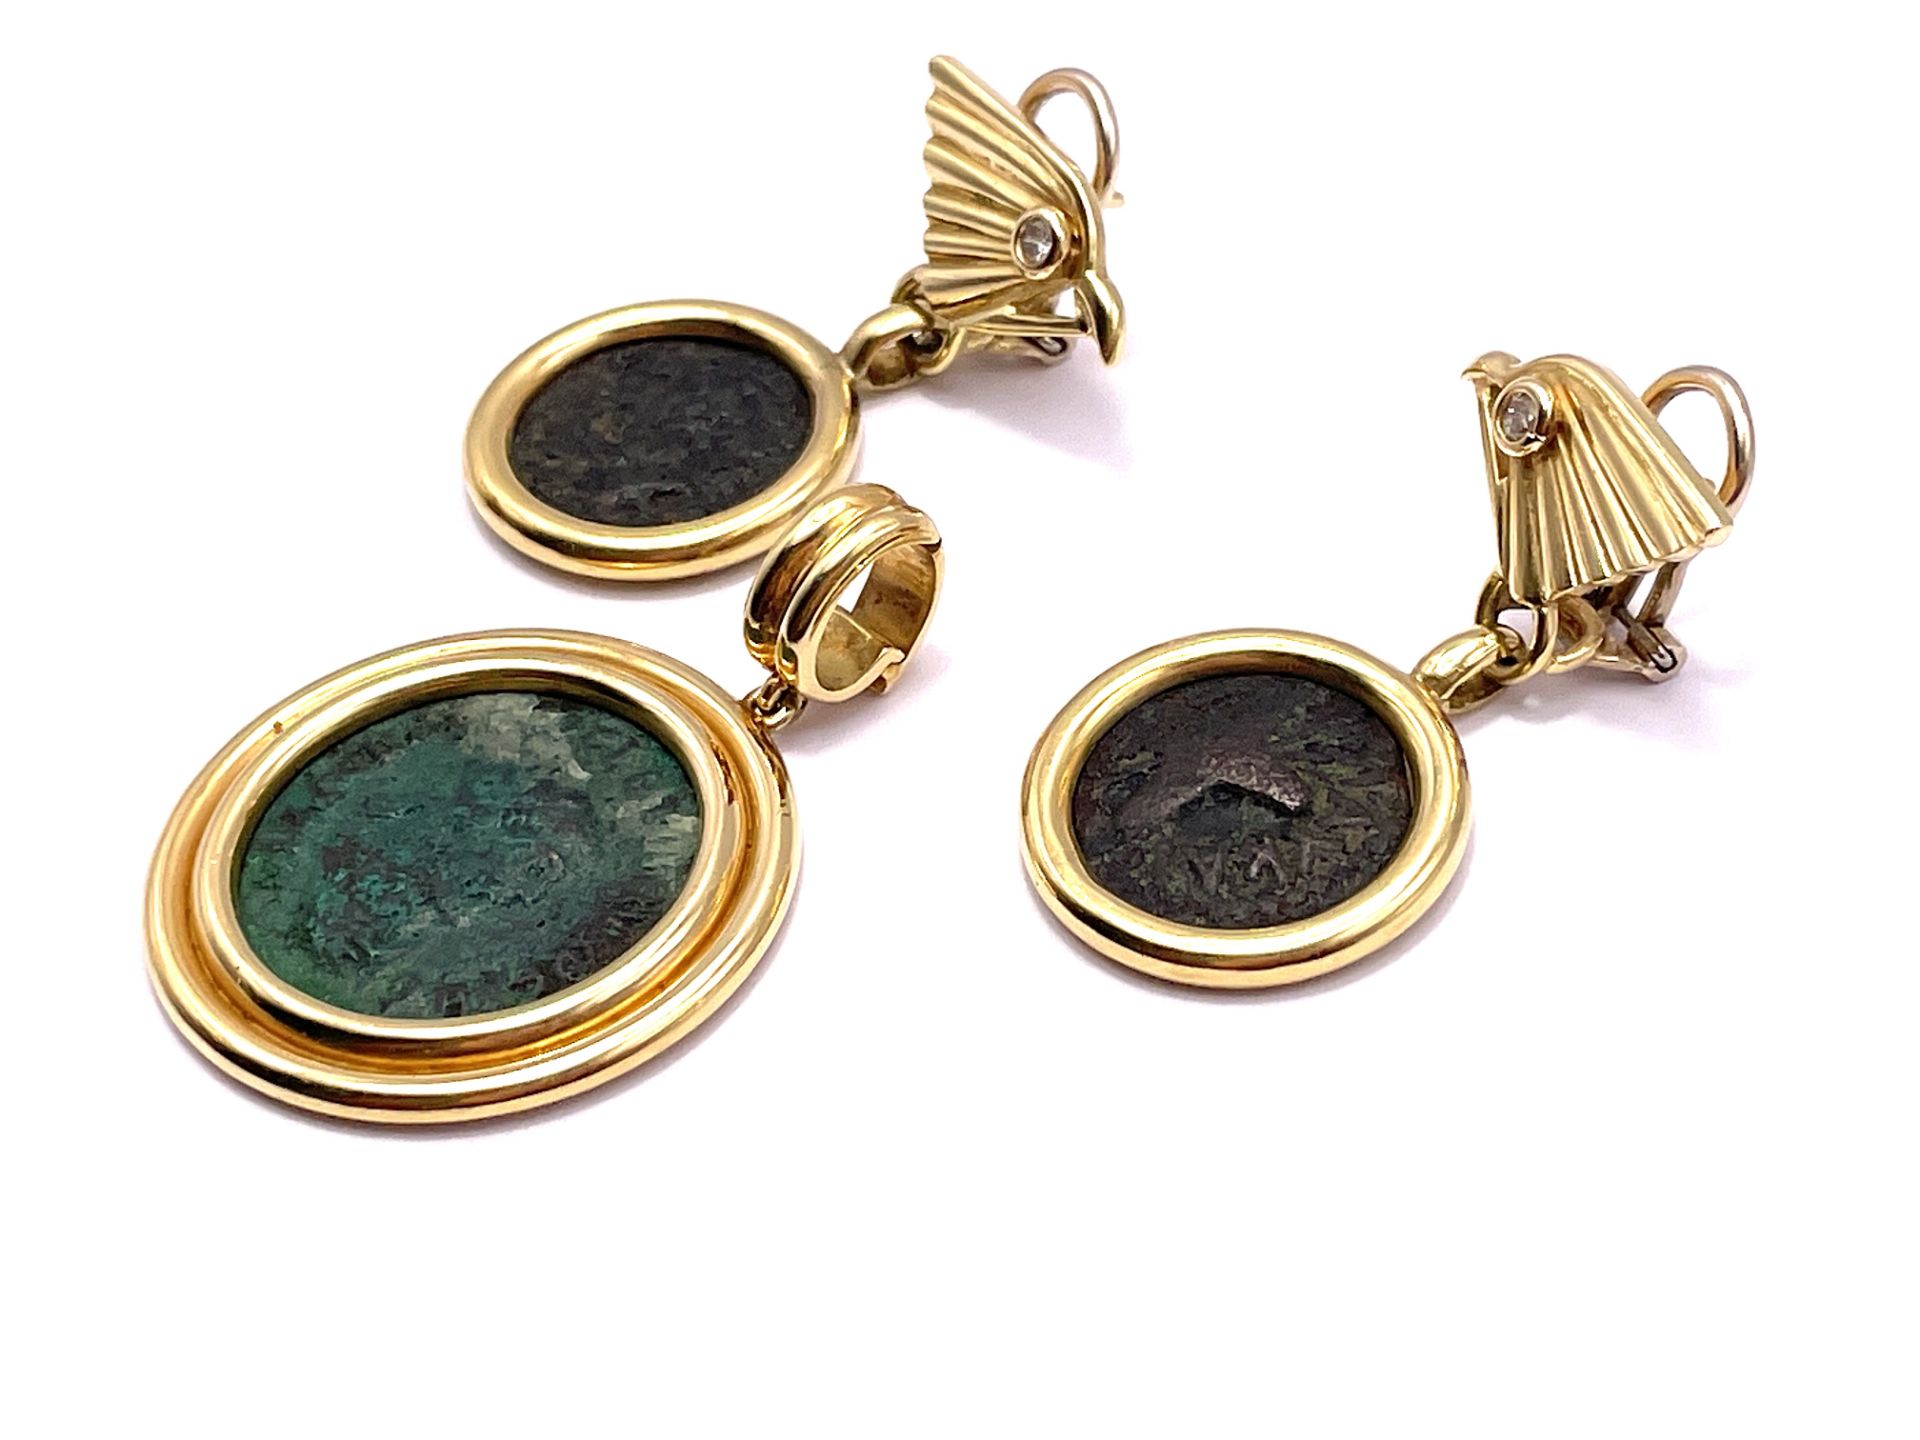 Set of ear stud clips and pendant with antique coins - Image 4 of 9